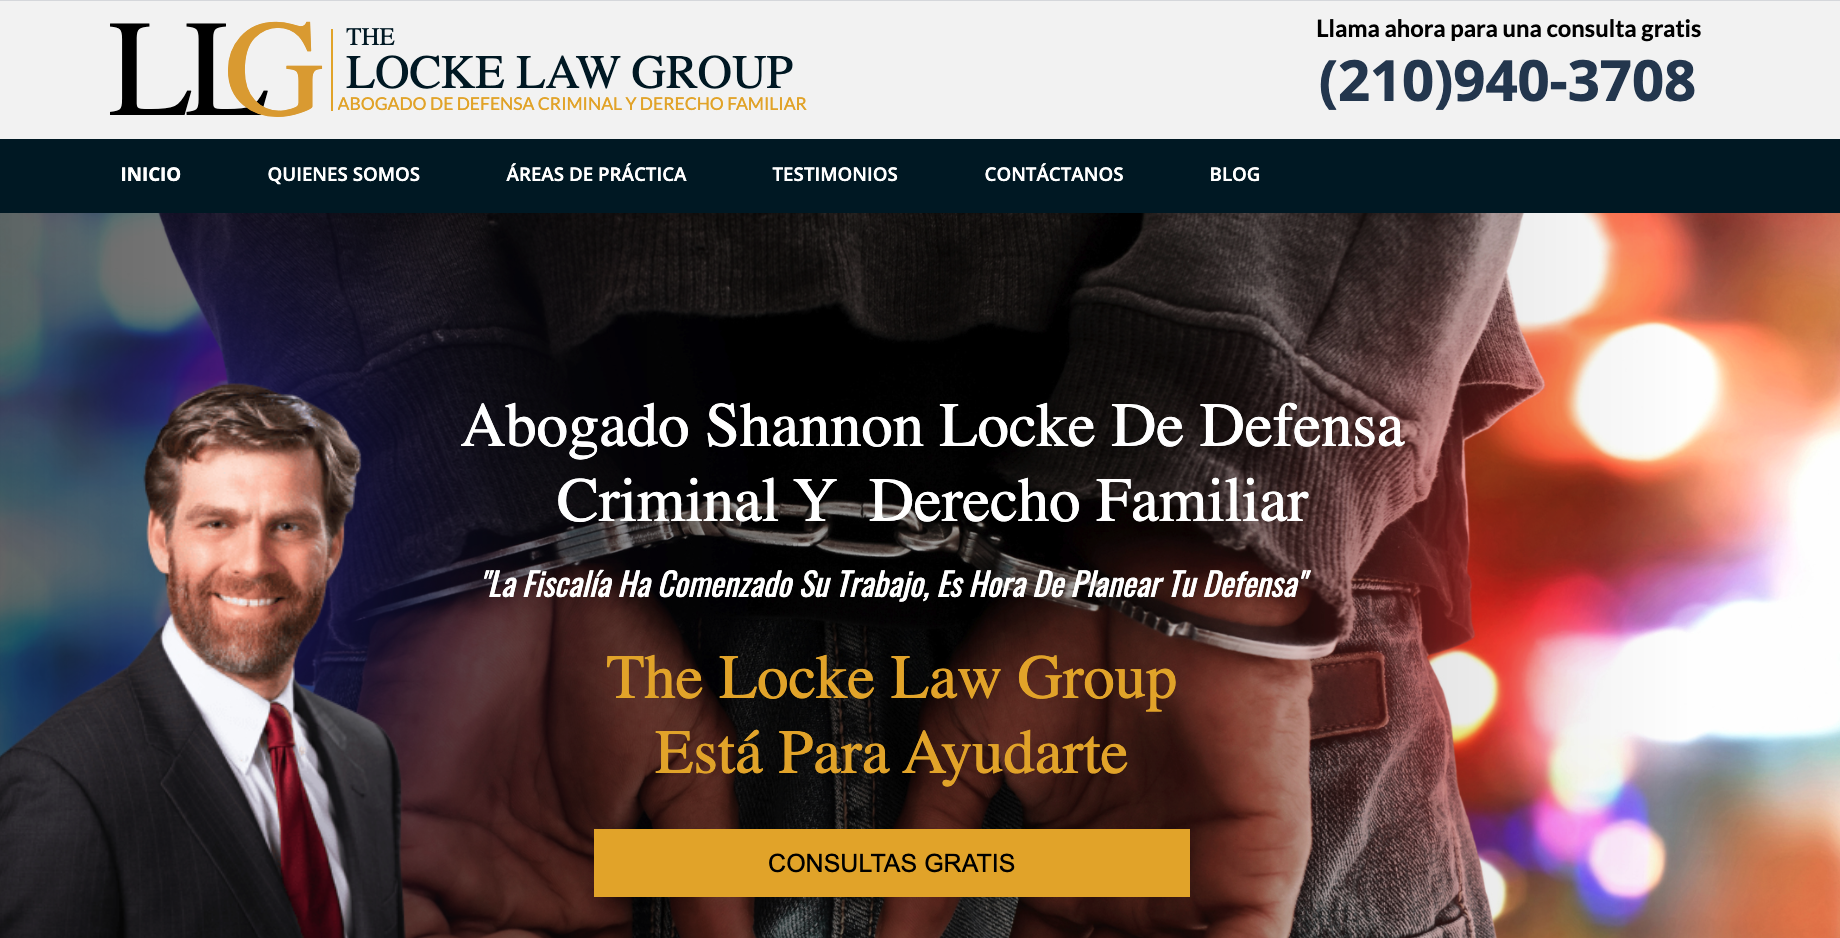 Criminal and defense attorney websites in Spanish